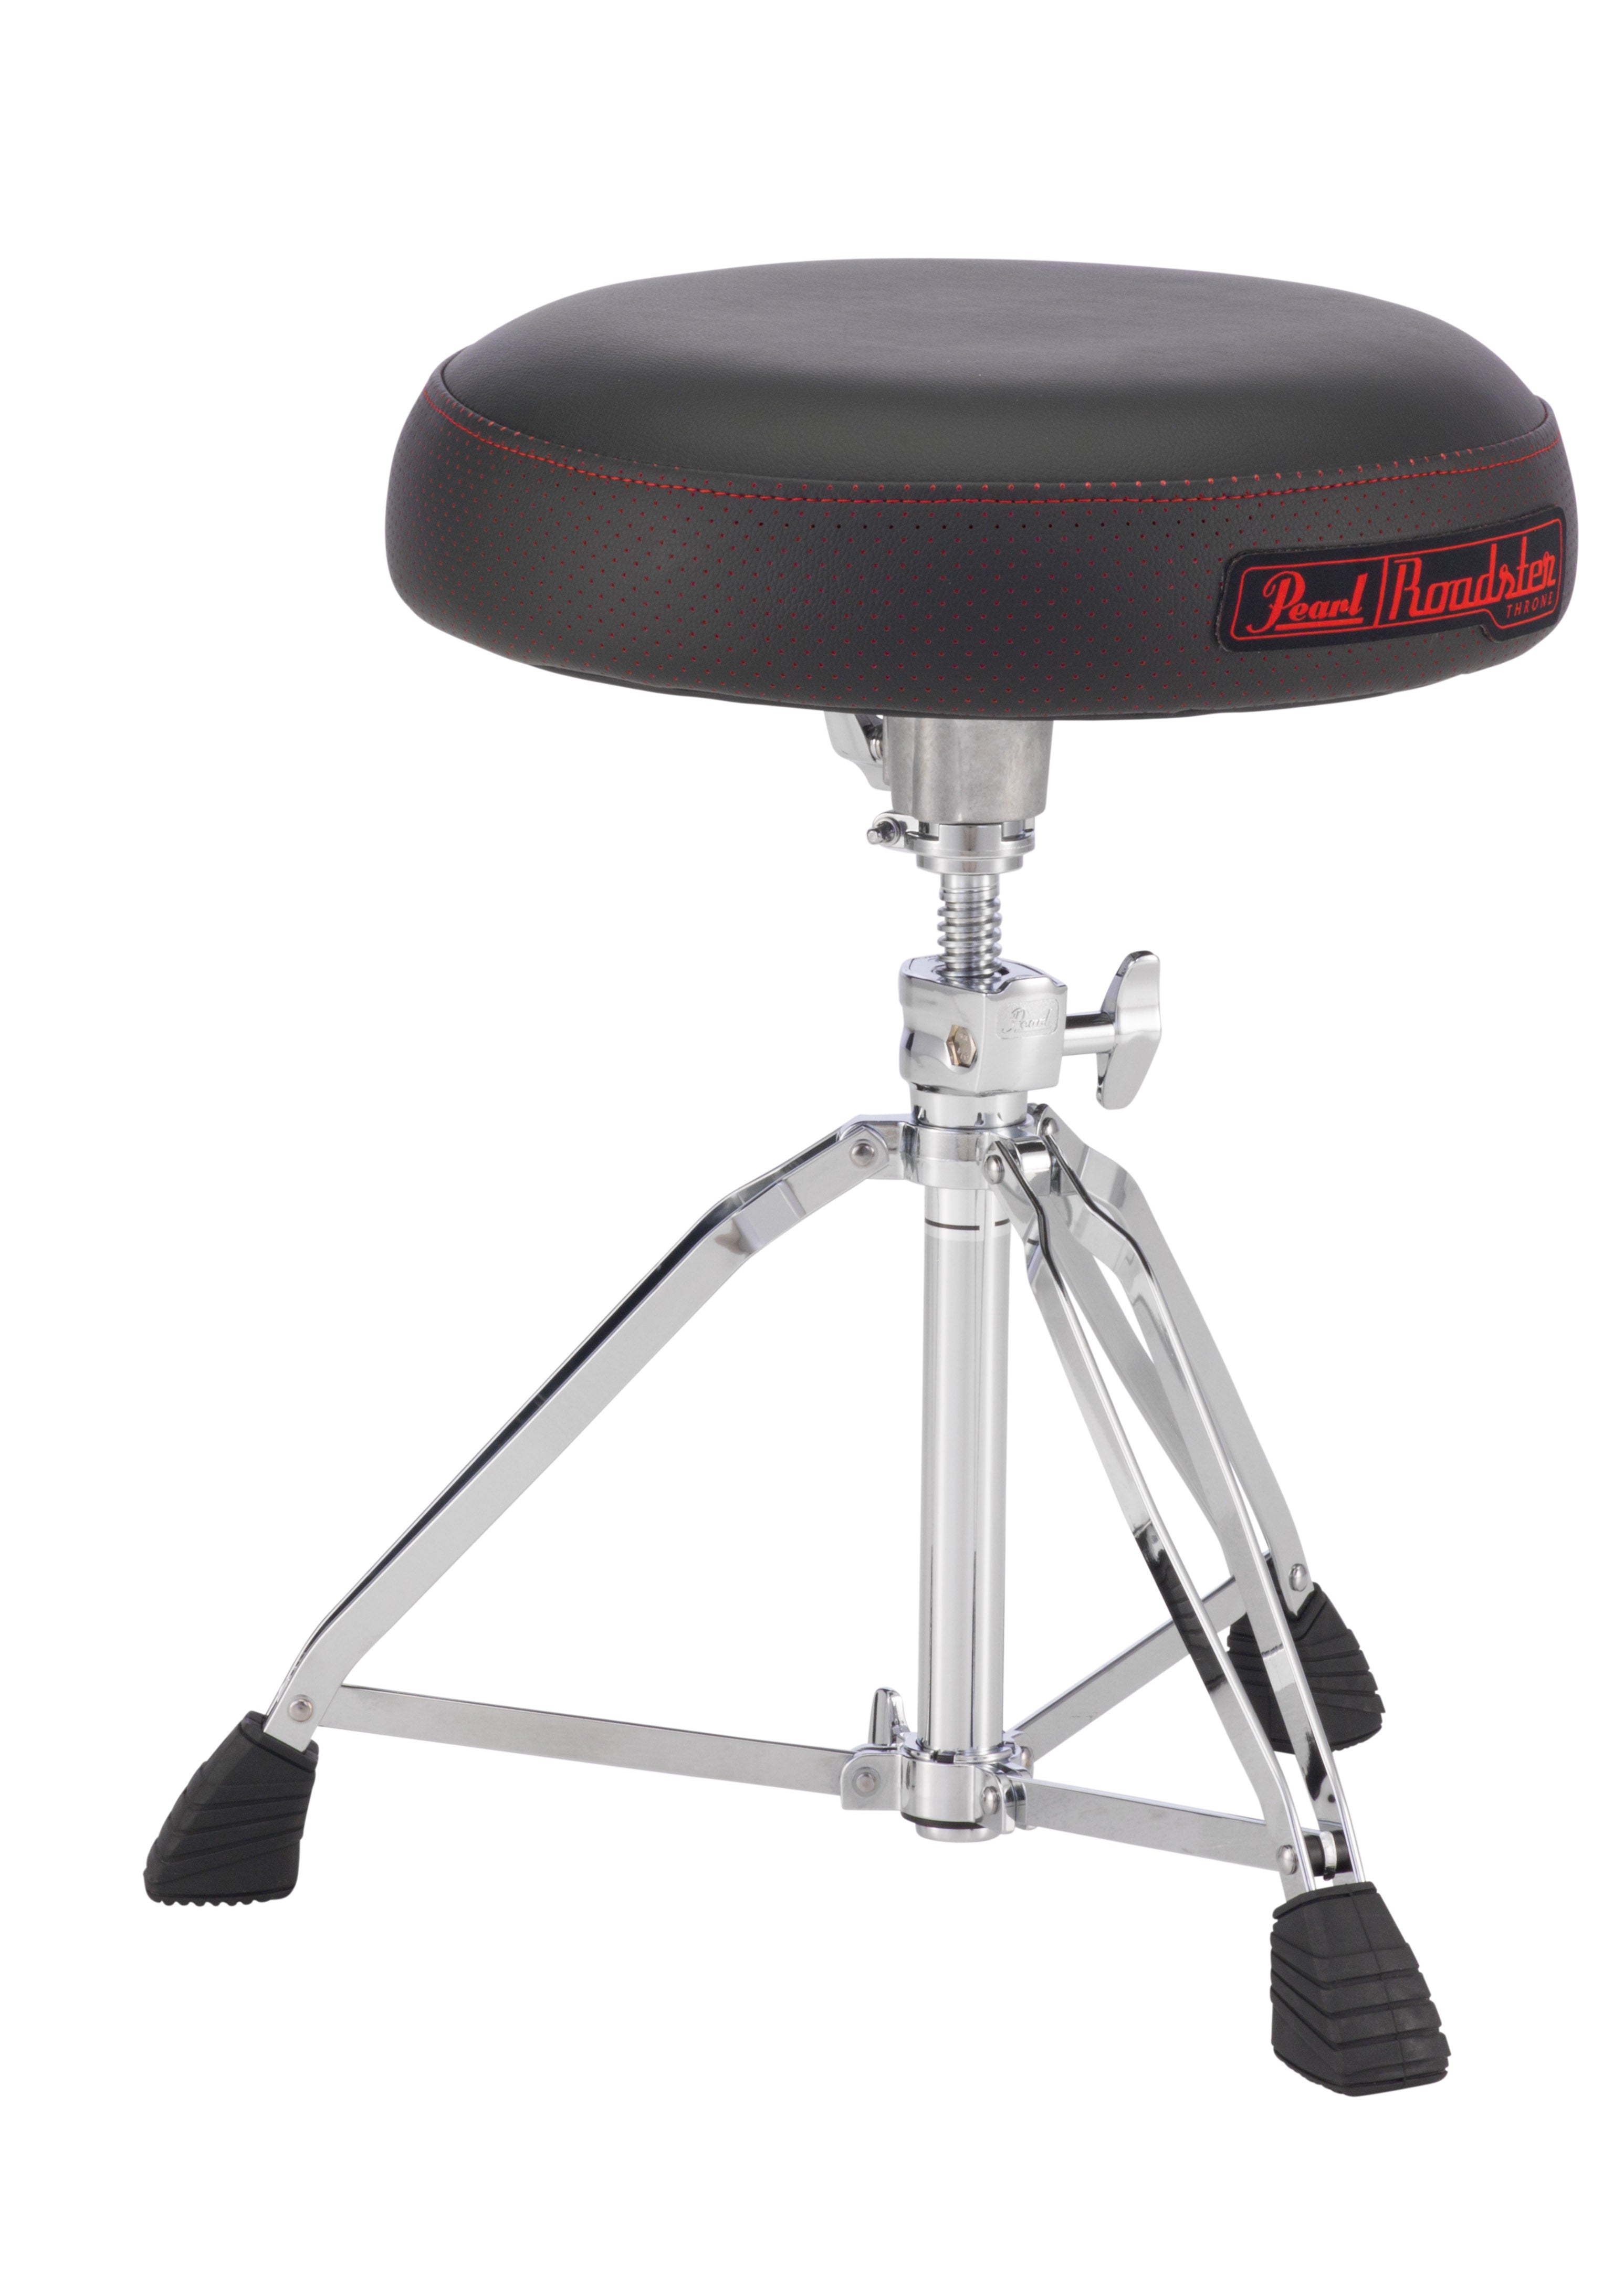 Drummer's　Roadster　Seat　Throne　—　Round　Pearl　D-1500　With　Music